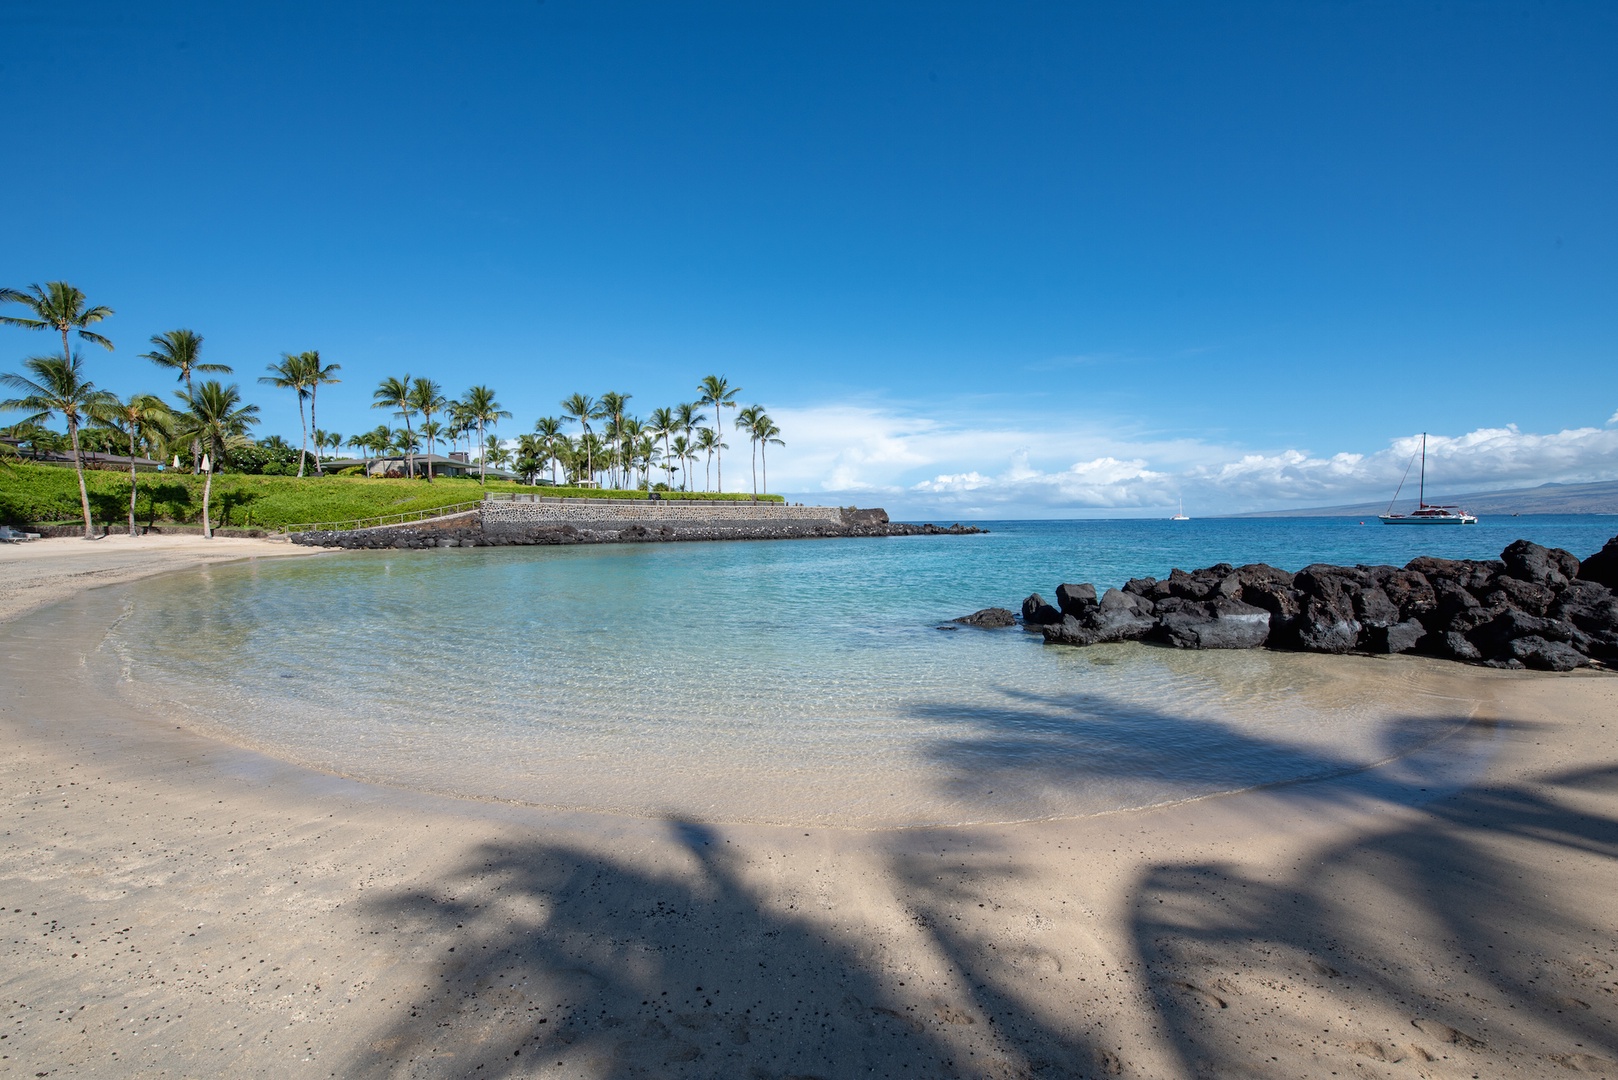 Kamuela Vacation Rentals, 3BD OneOcean (1C) at Mauna Lani Resort - This Kohala Coast vacation home on the Big Island of Hawaii allows easy access (5 minutes drive) to the white sands of magnificent Mauna Lani Beach and the exclusive Mauna Lani Beach Club